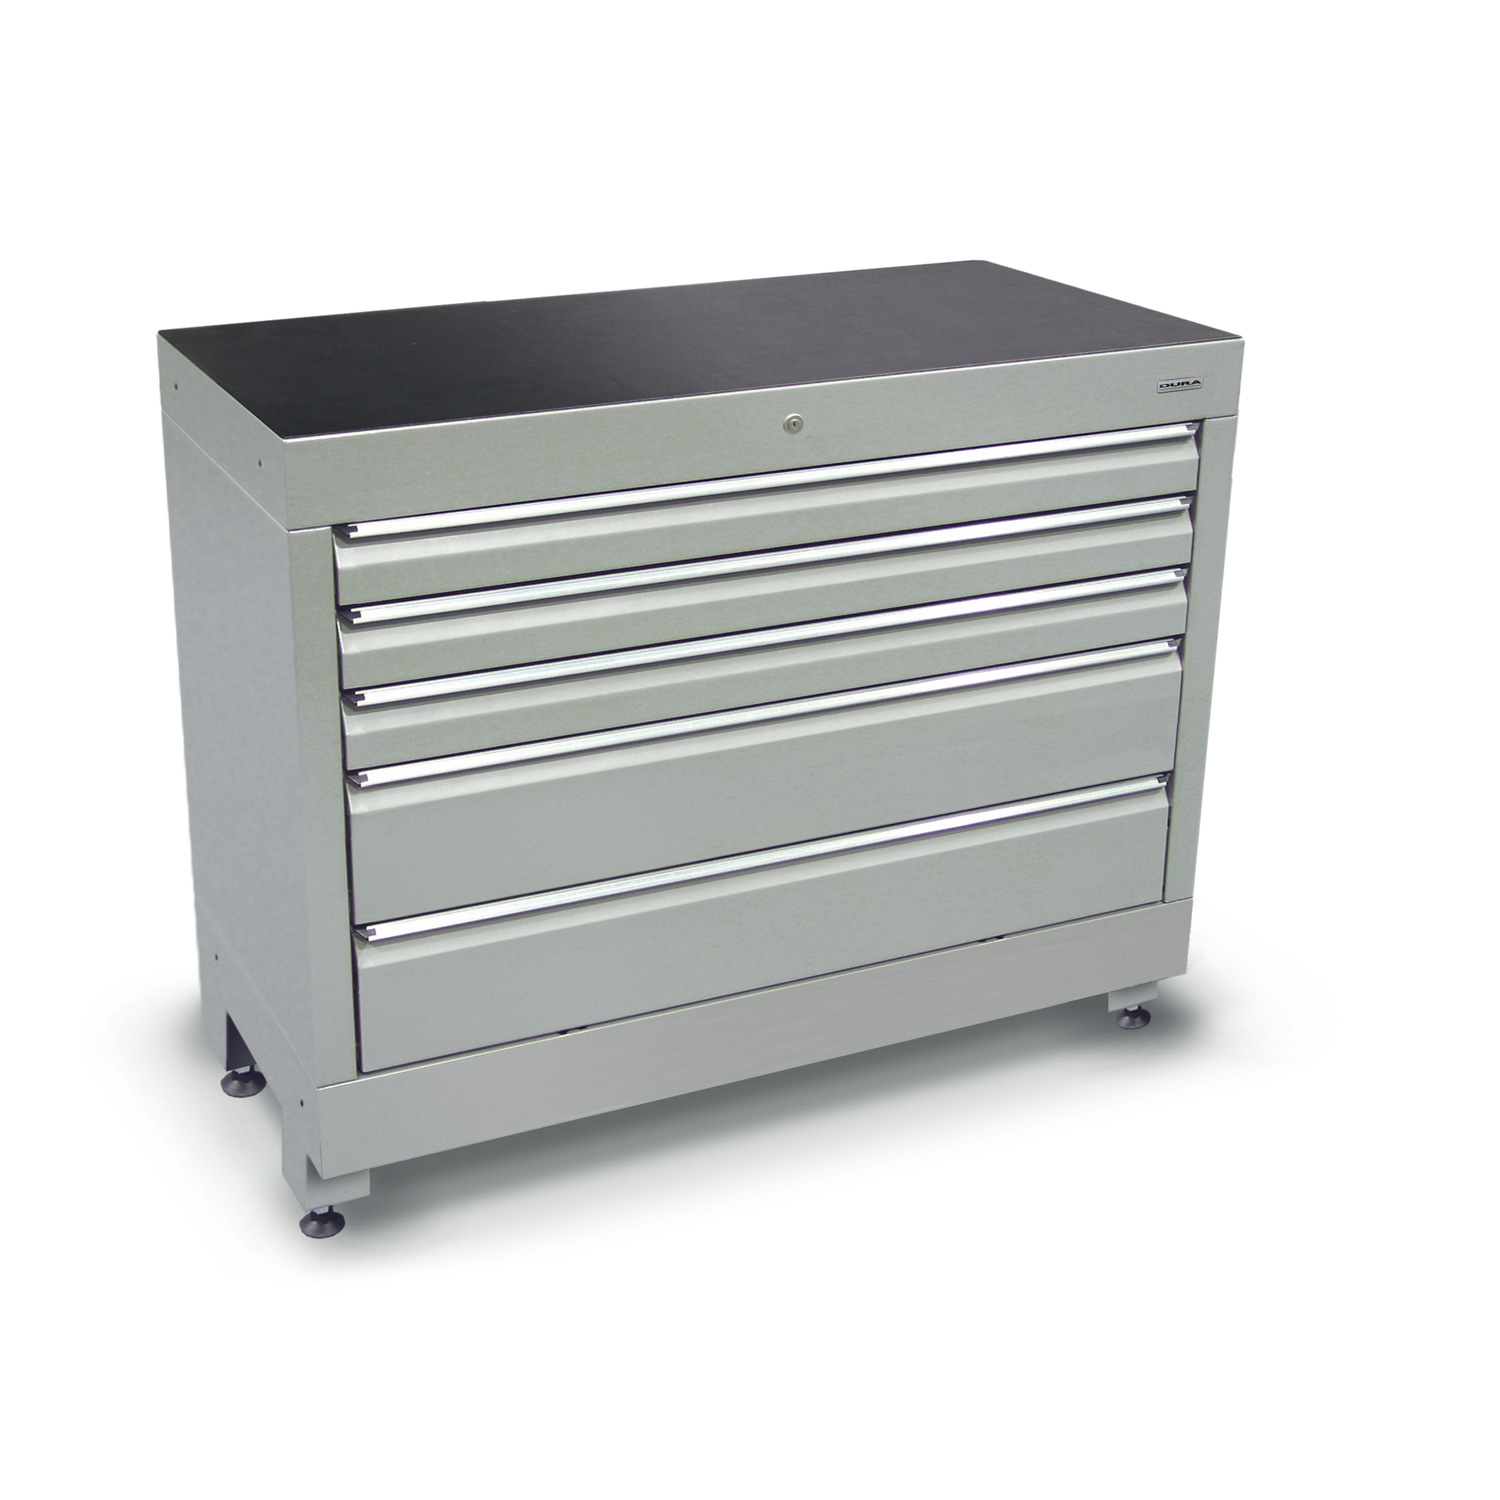 1200 series tool cabinet with an additional inner sliding tray (5 drawers)